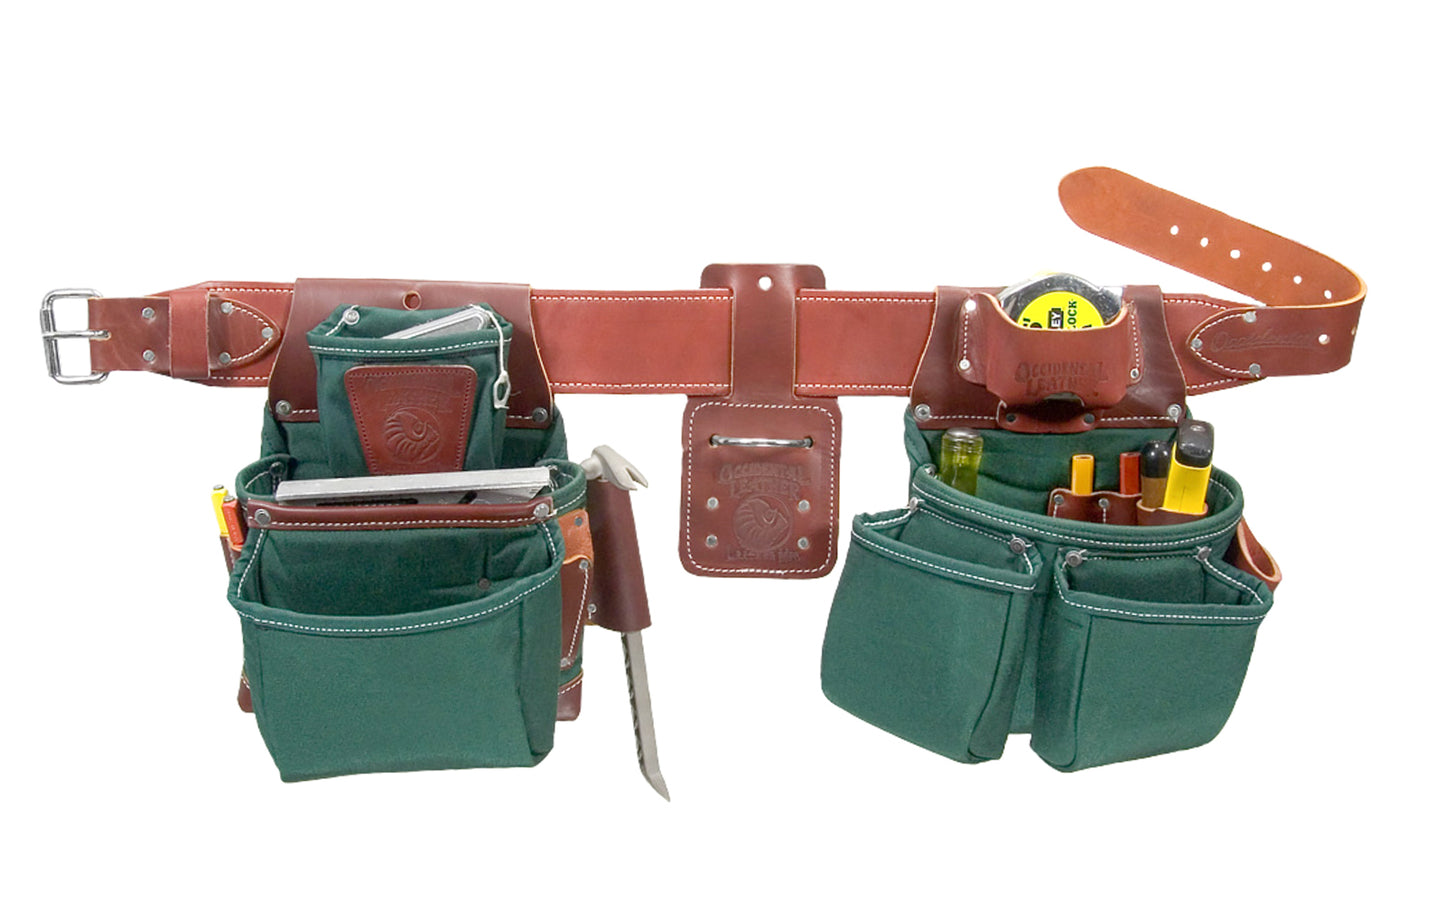 Occidental Leather "OxyLights" Tool Belt Set ~ 8080DB LG ~ Large Belt Size (3" Large Ranger Work Belt) - Padded Two Ply Tool Bags Keep Shape - 24 pockets - 759244039900. Made of Extremely Abrasion Resistant Industrial Nylon - "OxyLights" 8080DB Tool Belt Package - Industrial Nylon Material for heavy use. Made in USA